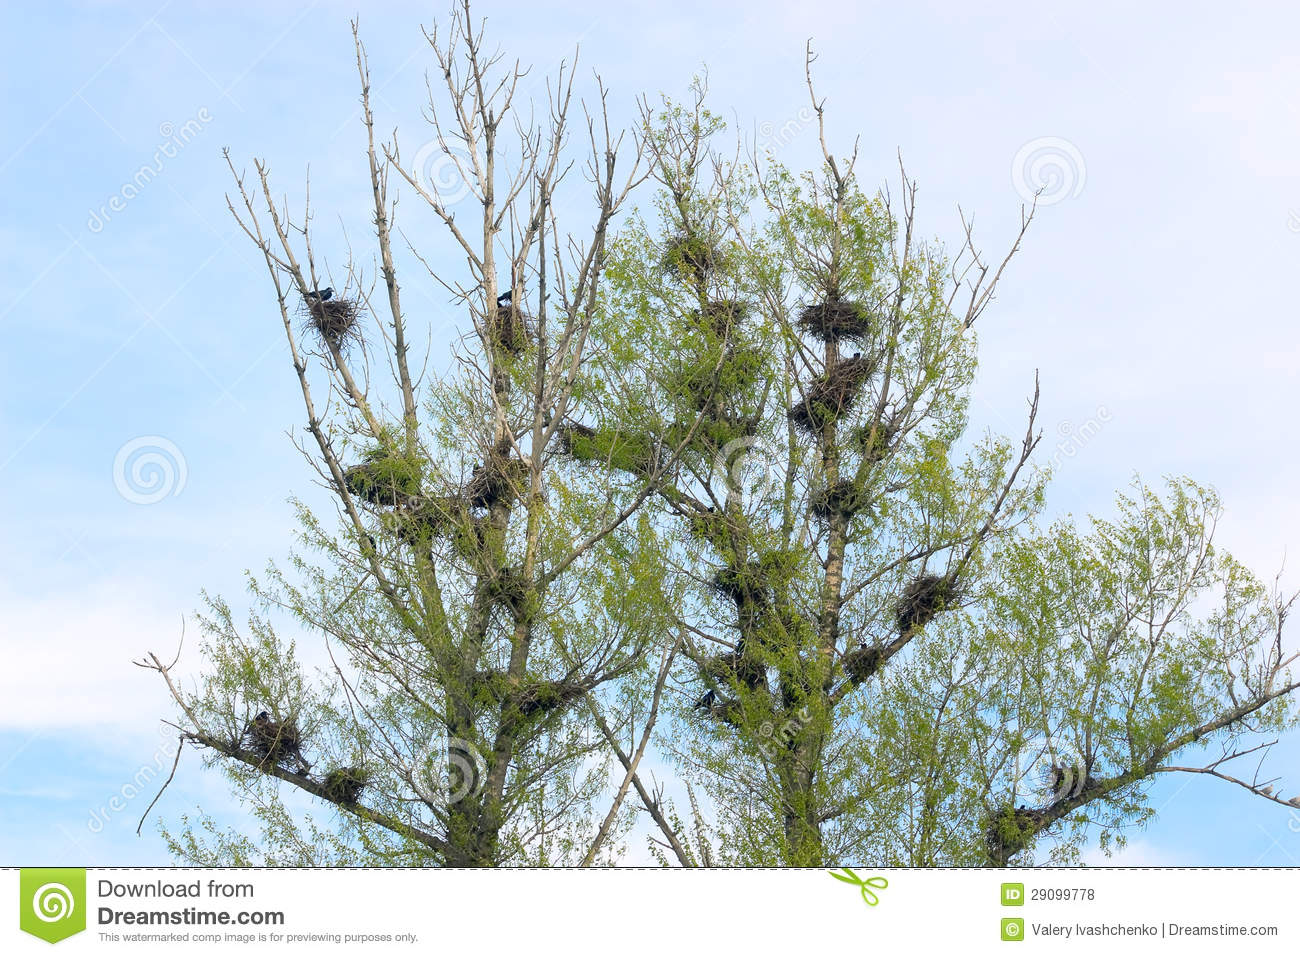 Crows Nest Royalty Free Stock Photos   Image  29099778